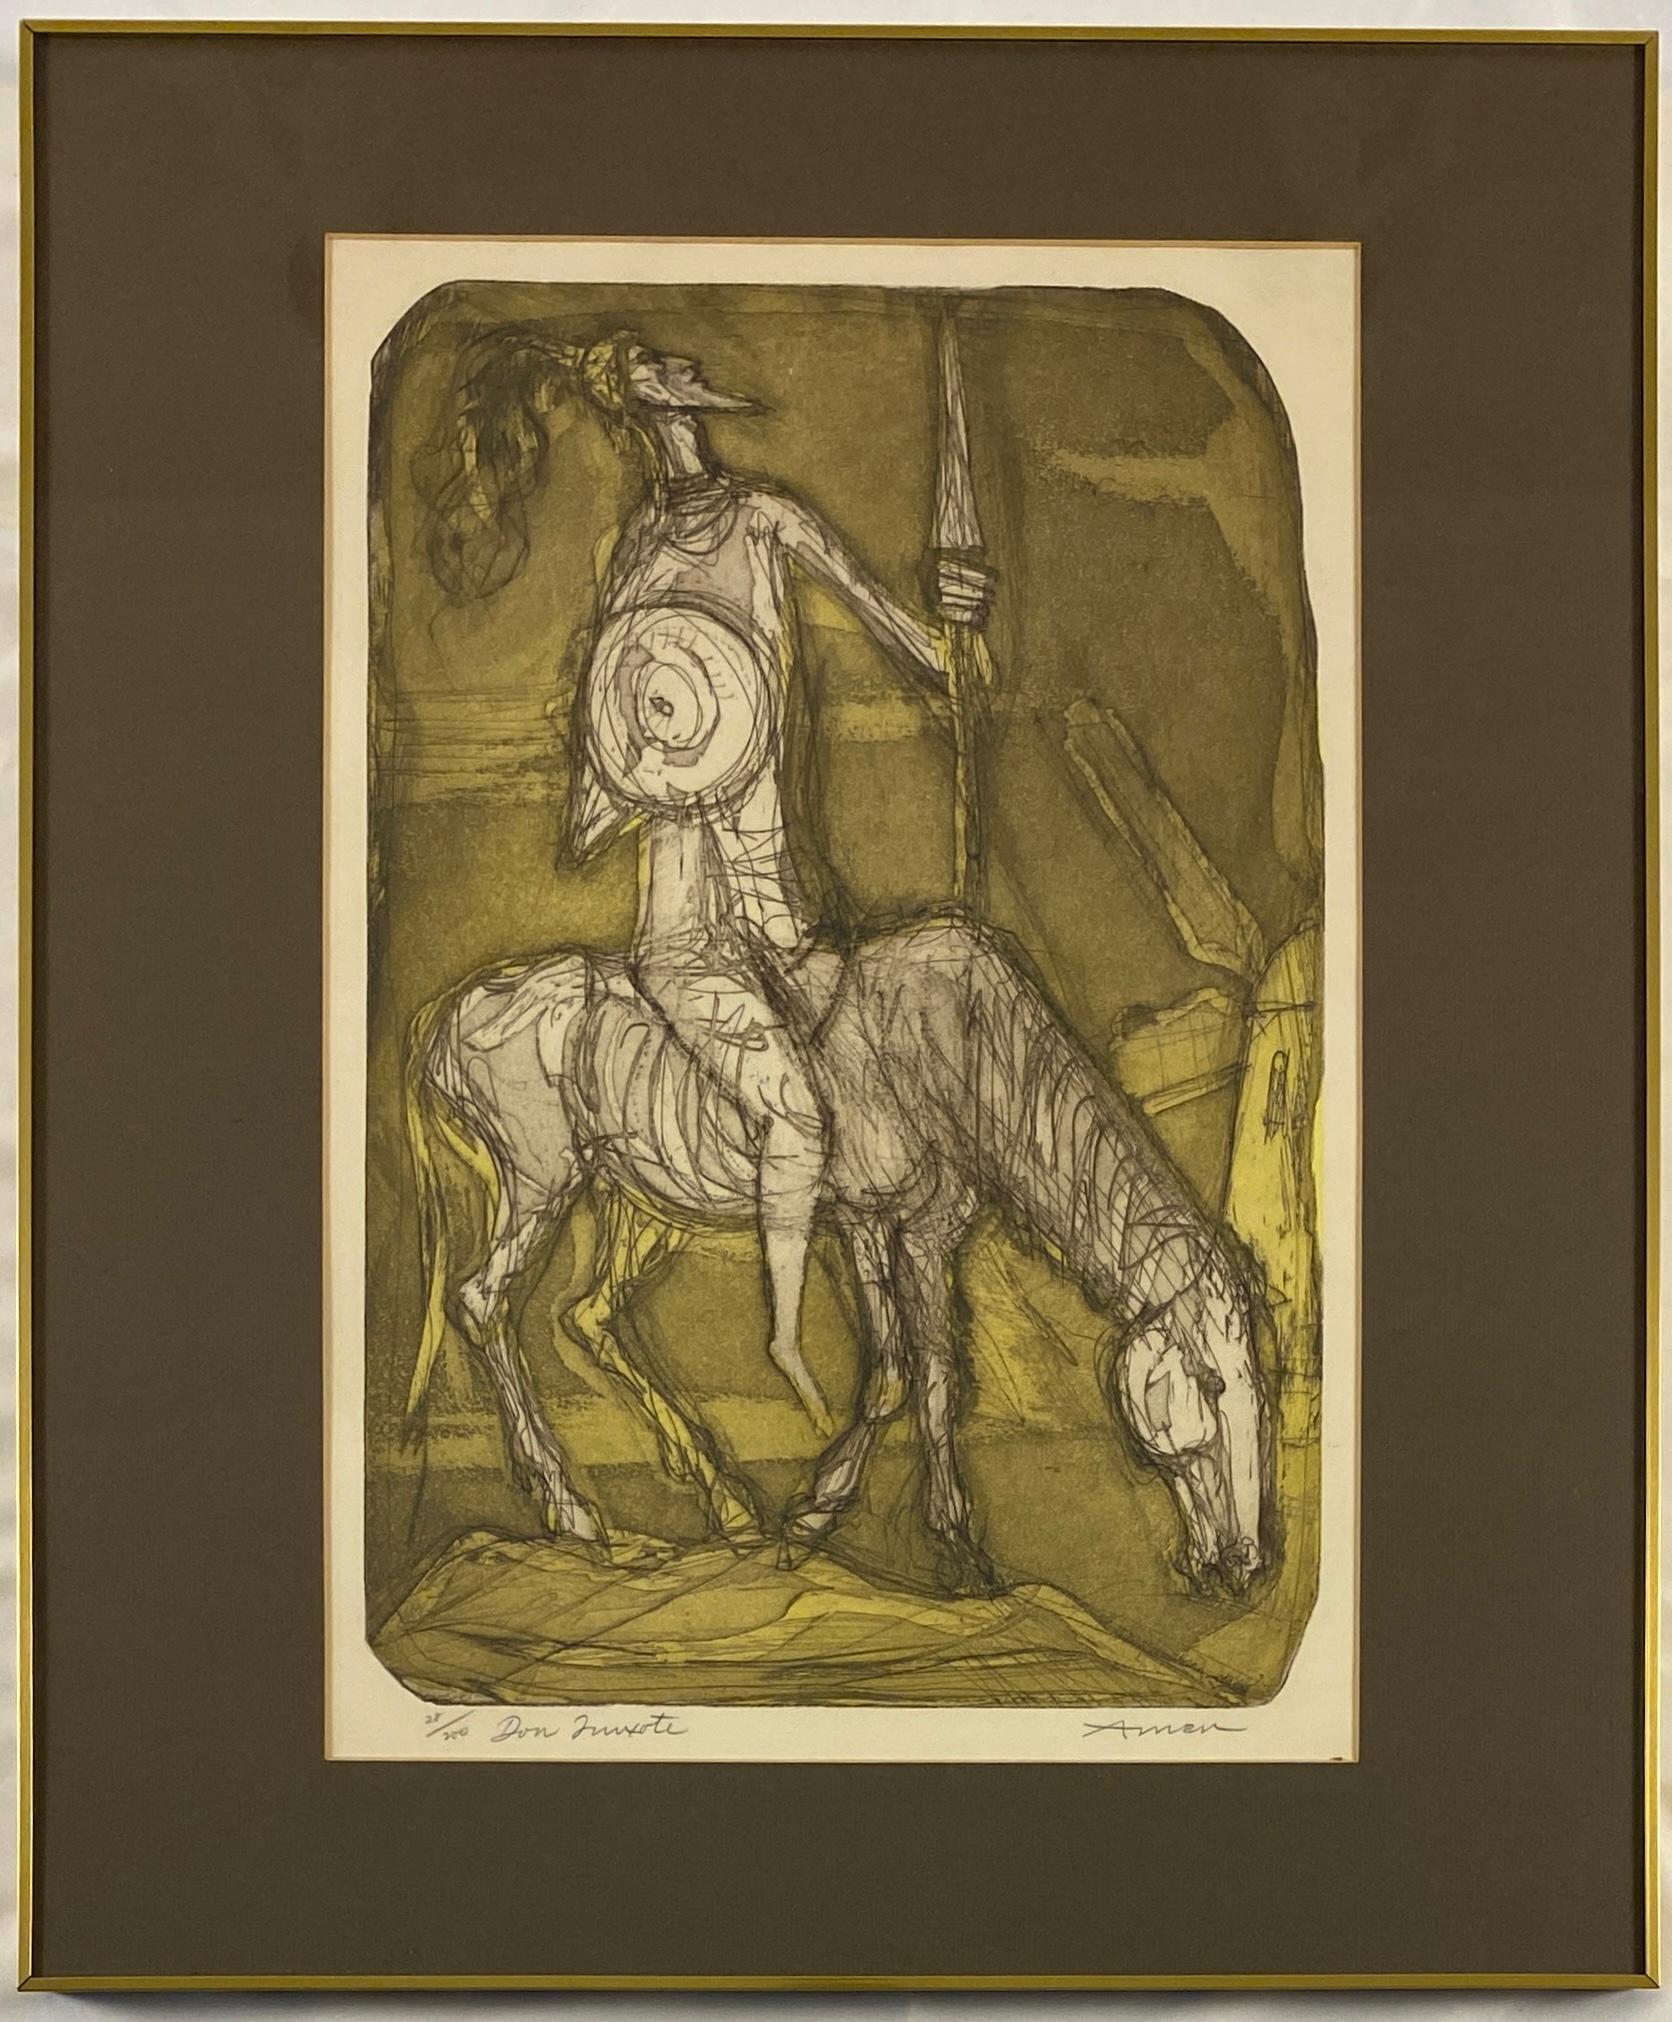 Don Quixote Art.
Don Quixote Signed Lithograph in the manner of Pablo Picasso by Irving Amen. 
Pencil signed by the artist, number 28/200.

This fine quality contemporary and decorative artwork would enhance any setting. Measures: 20 1/4